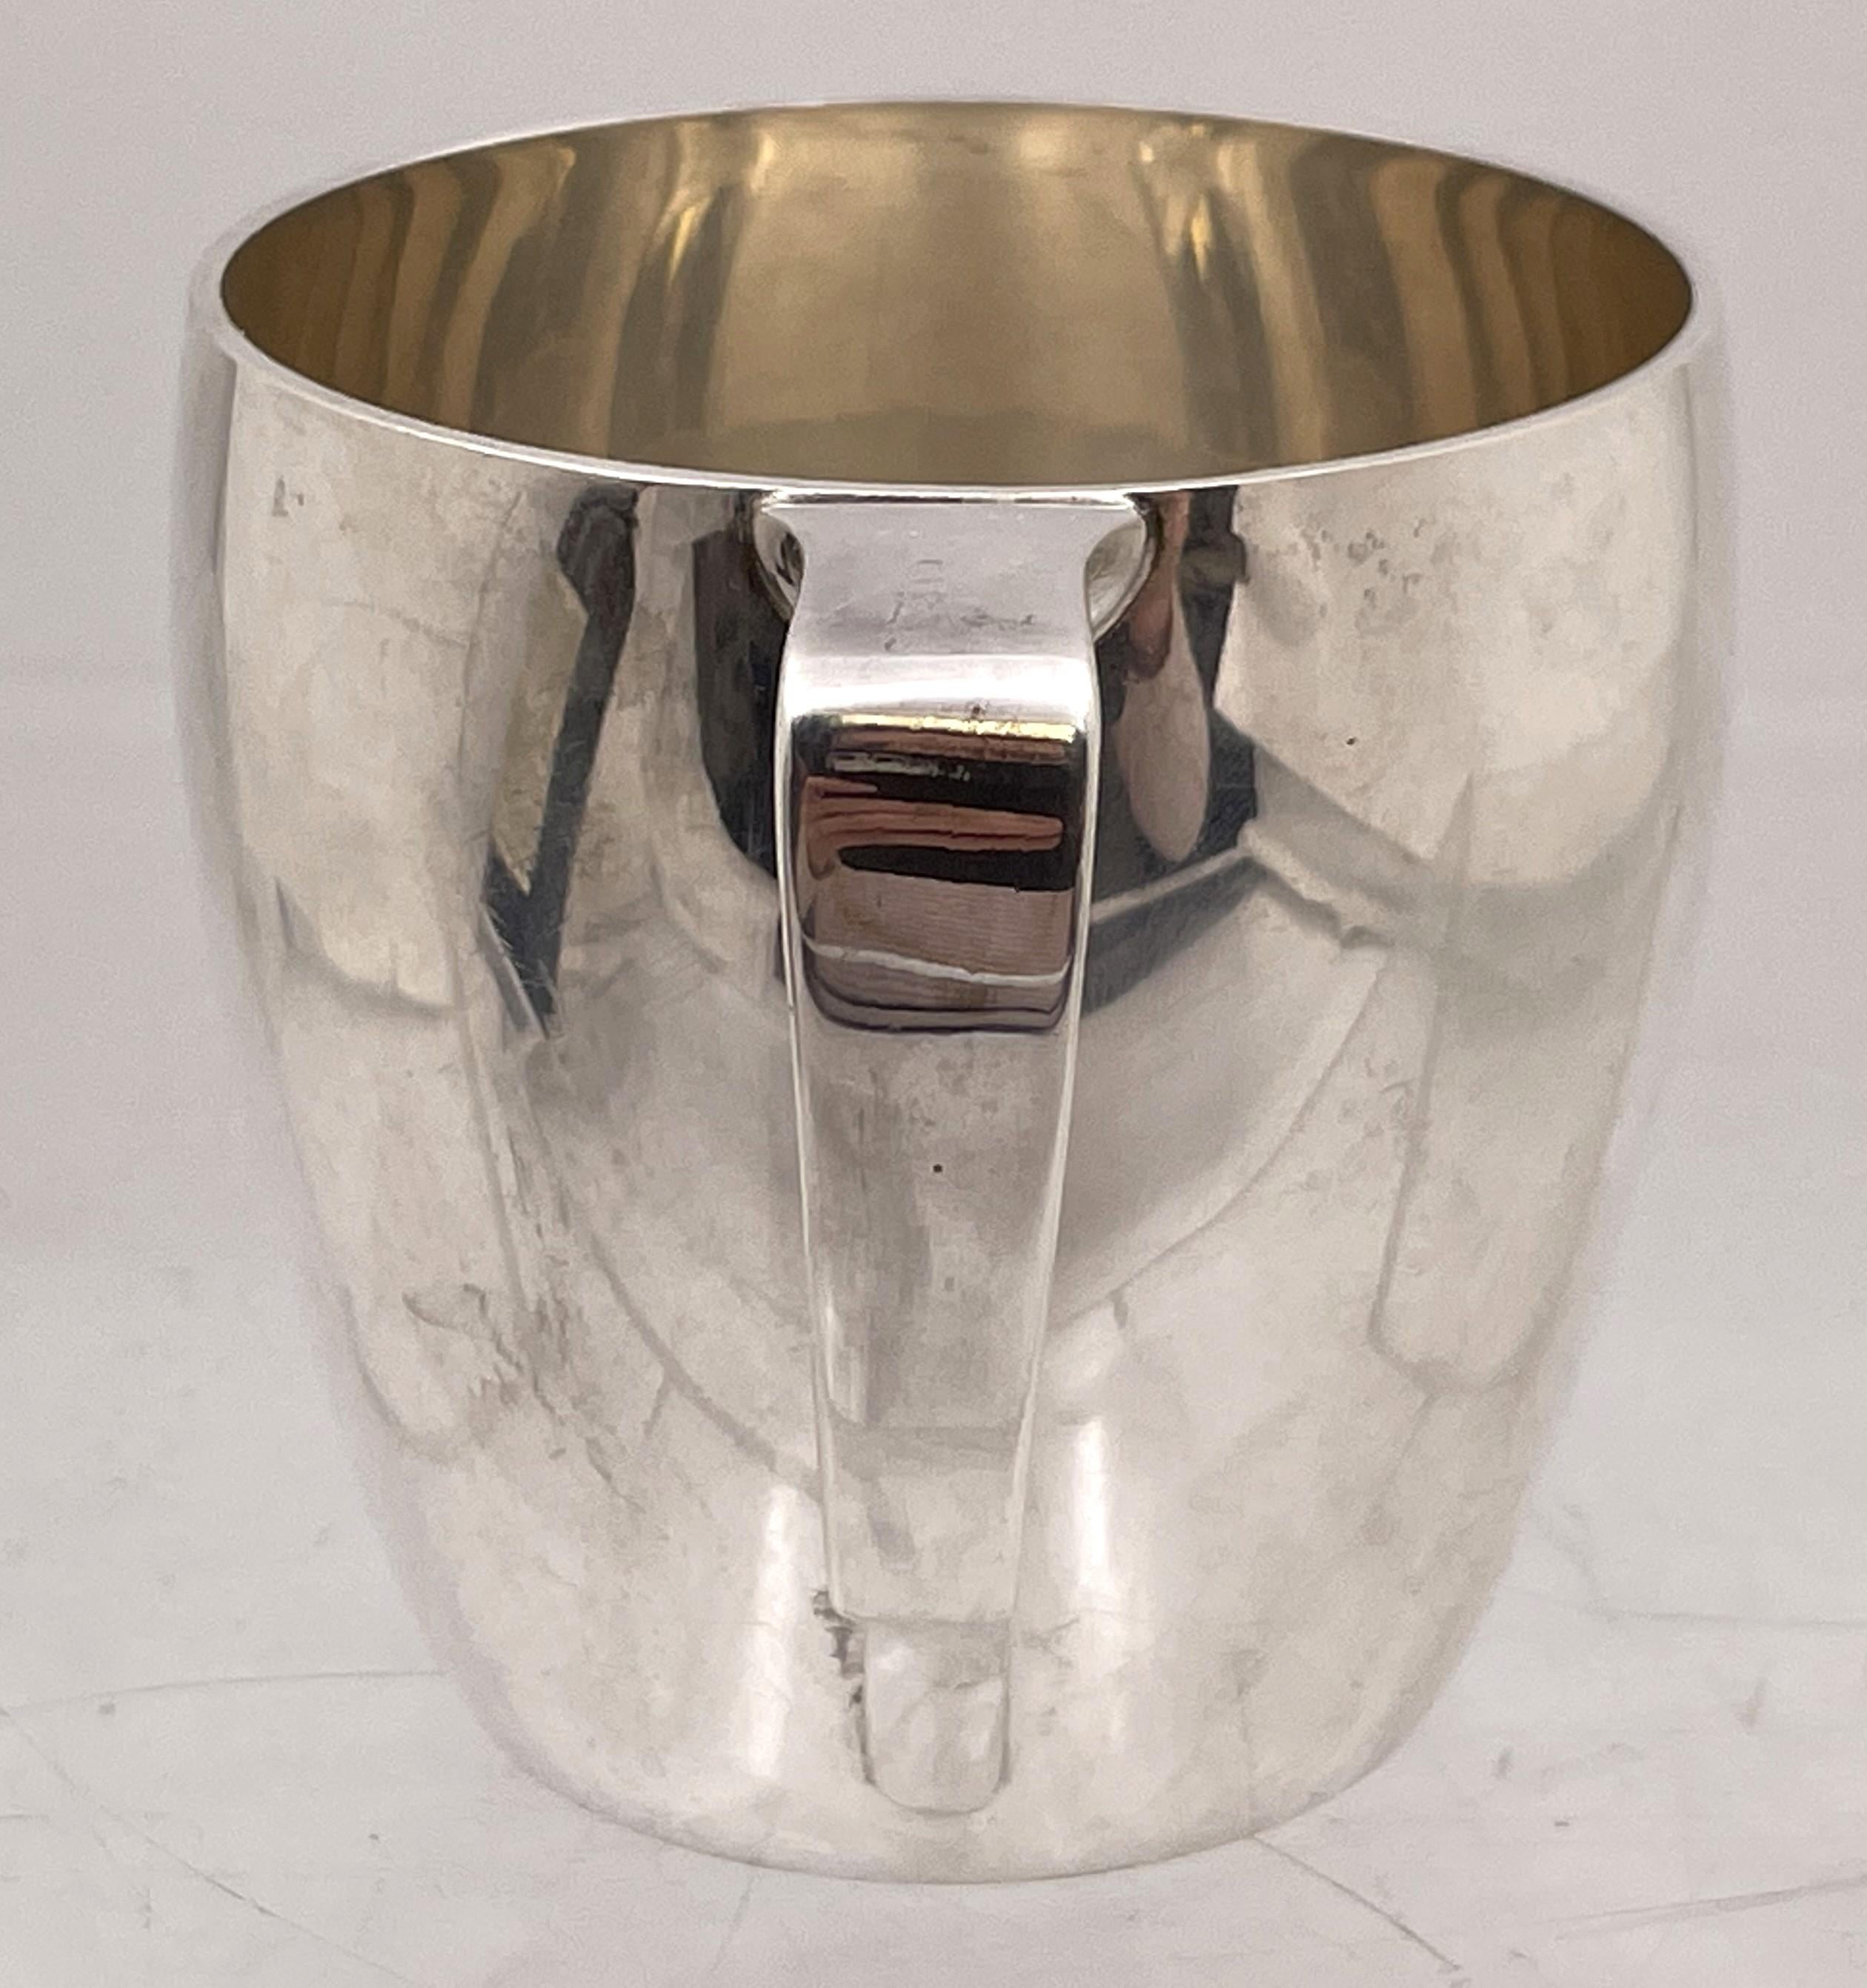 Tiffany & Co. sterling silver child Christening mug in Mid-Century Modern style, with an elegant geometric design. It measures 2 3/4'' in height by 2 3/4'' in diameter at the top, and bears hallmarks as shown. 

The legendary Tiffany brand was